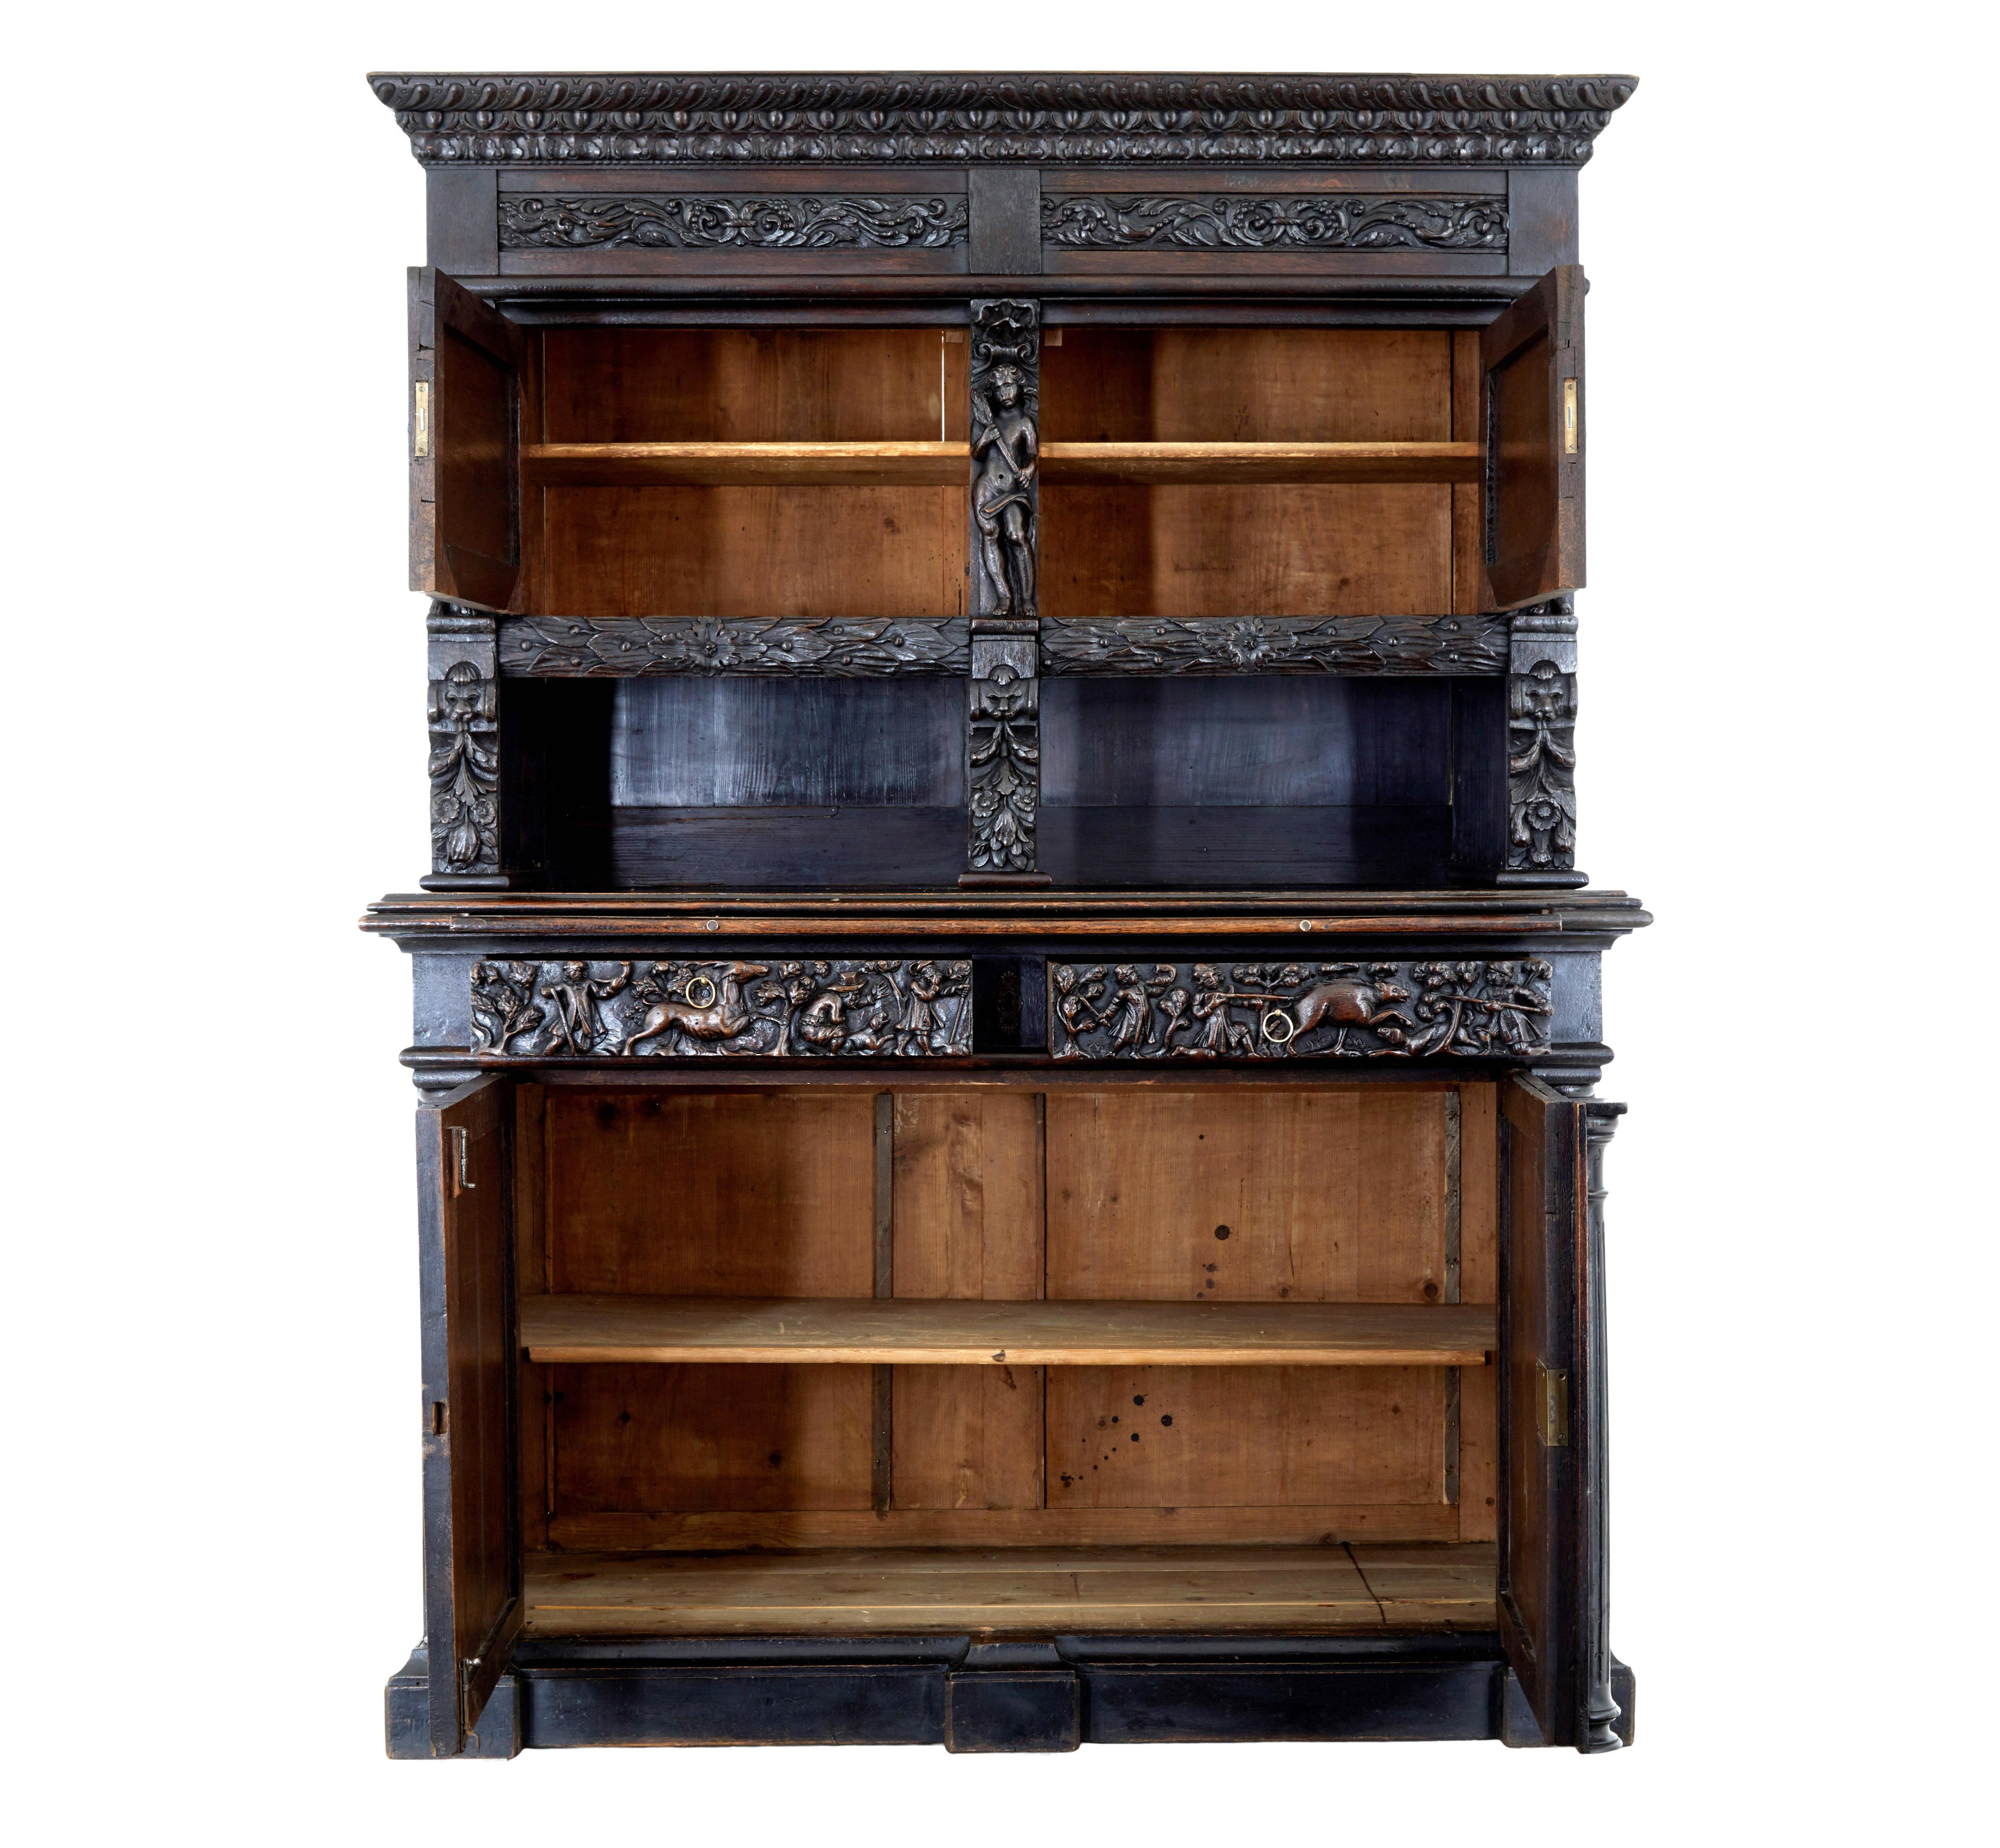 Sh carved oak cabinet circa 1870.

Profusely carved cupboard of grand proportions in the Baroque Revival taste. Comprising of 2 sections.

Understated cornice decorated with egg and dart carving with further carved panels below. Small double